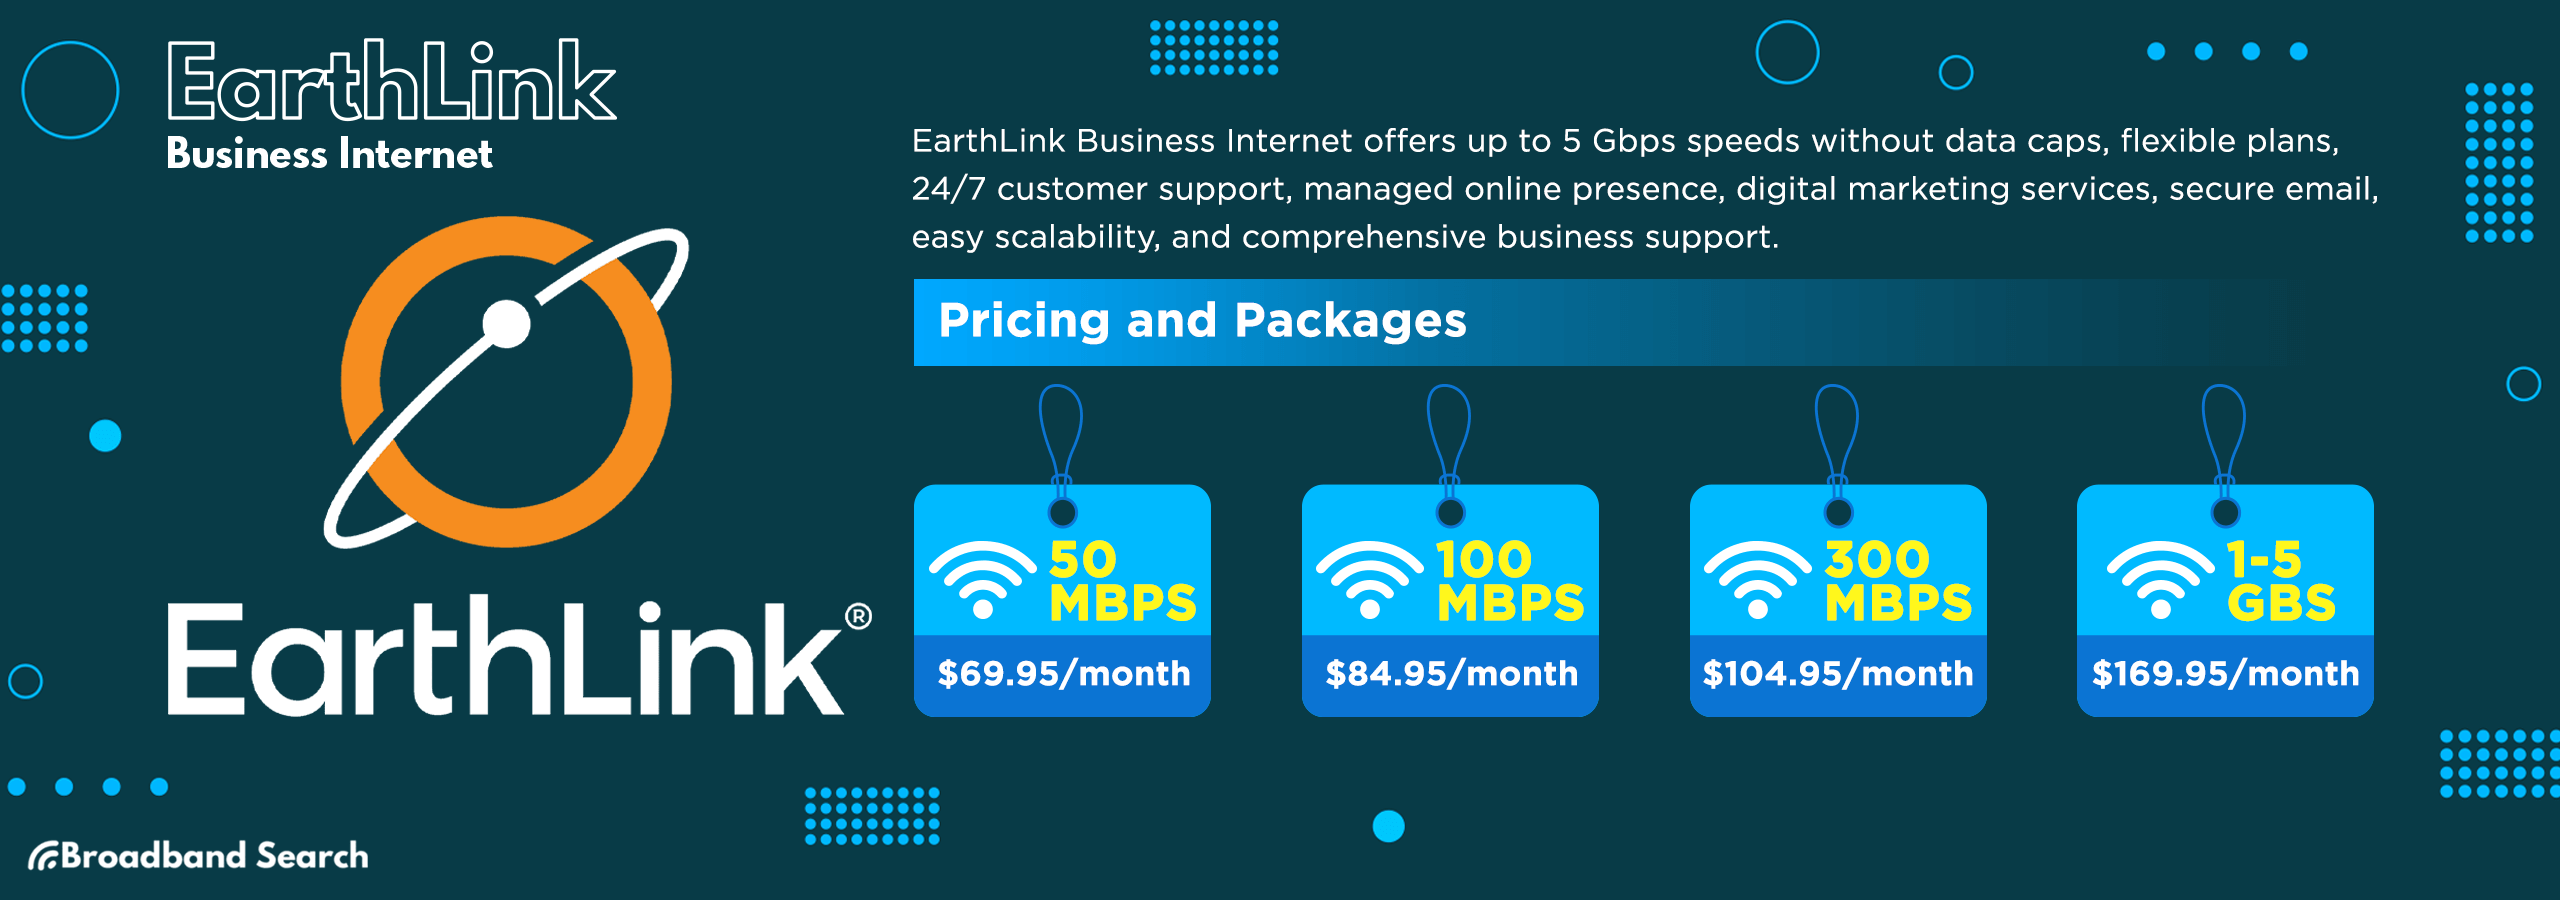 earthlink business internet plan details, pricing, and packages